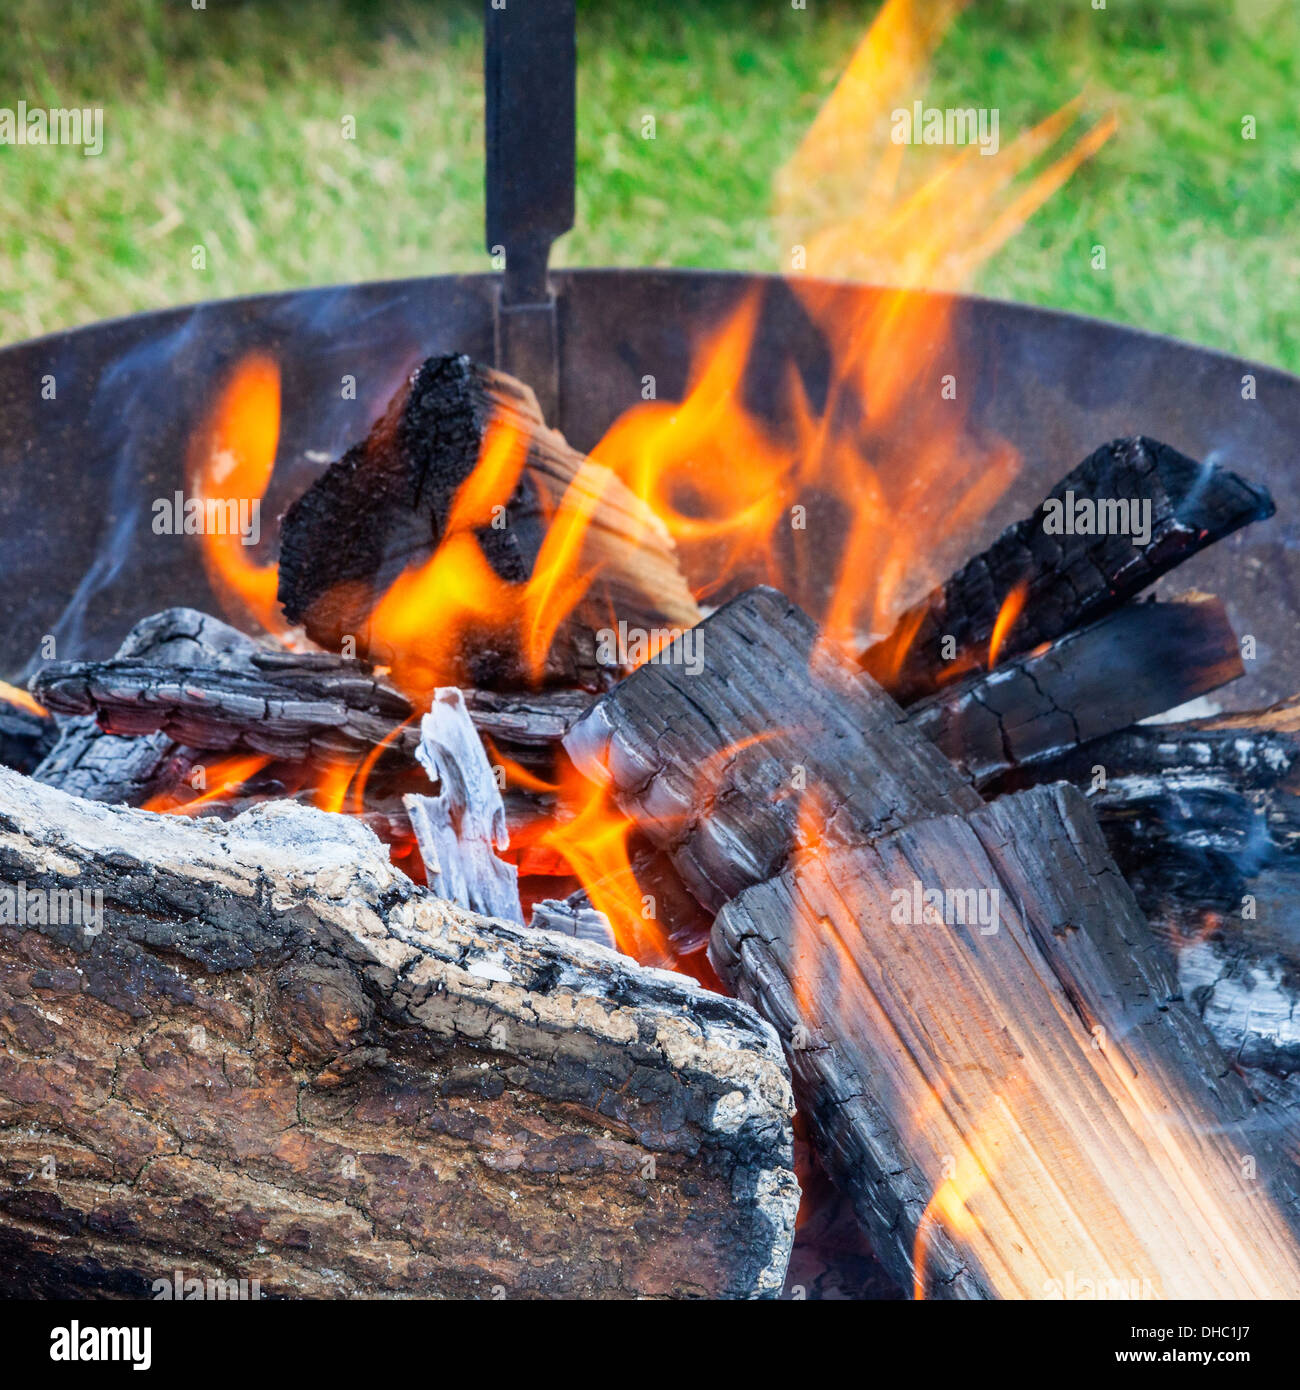 Logs burning in an outdoors fireplace Stock Photo